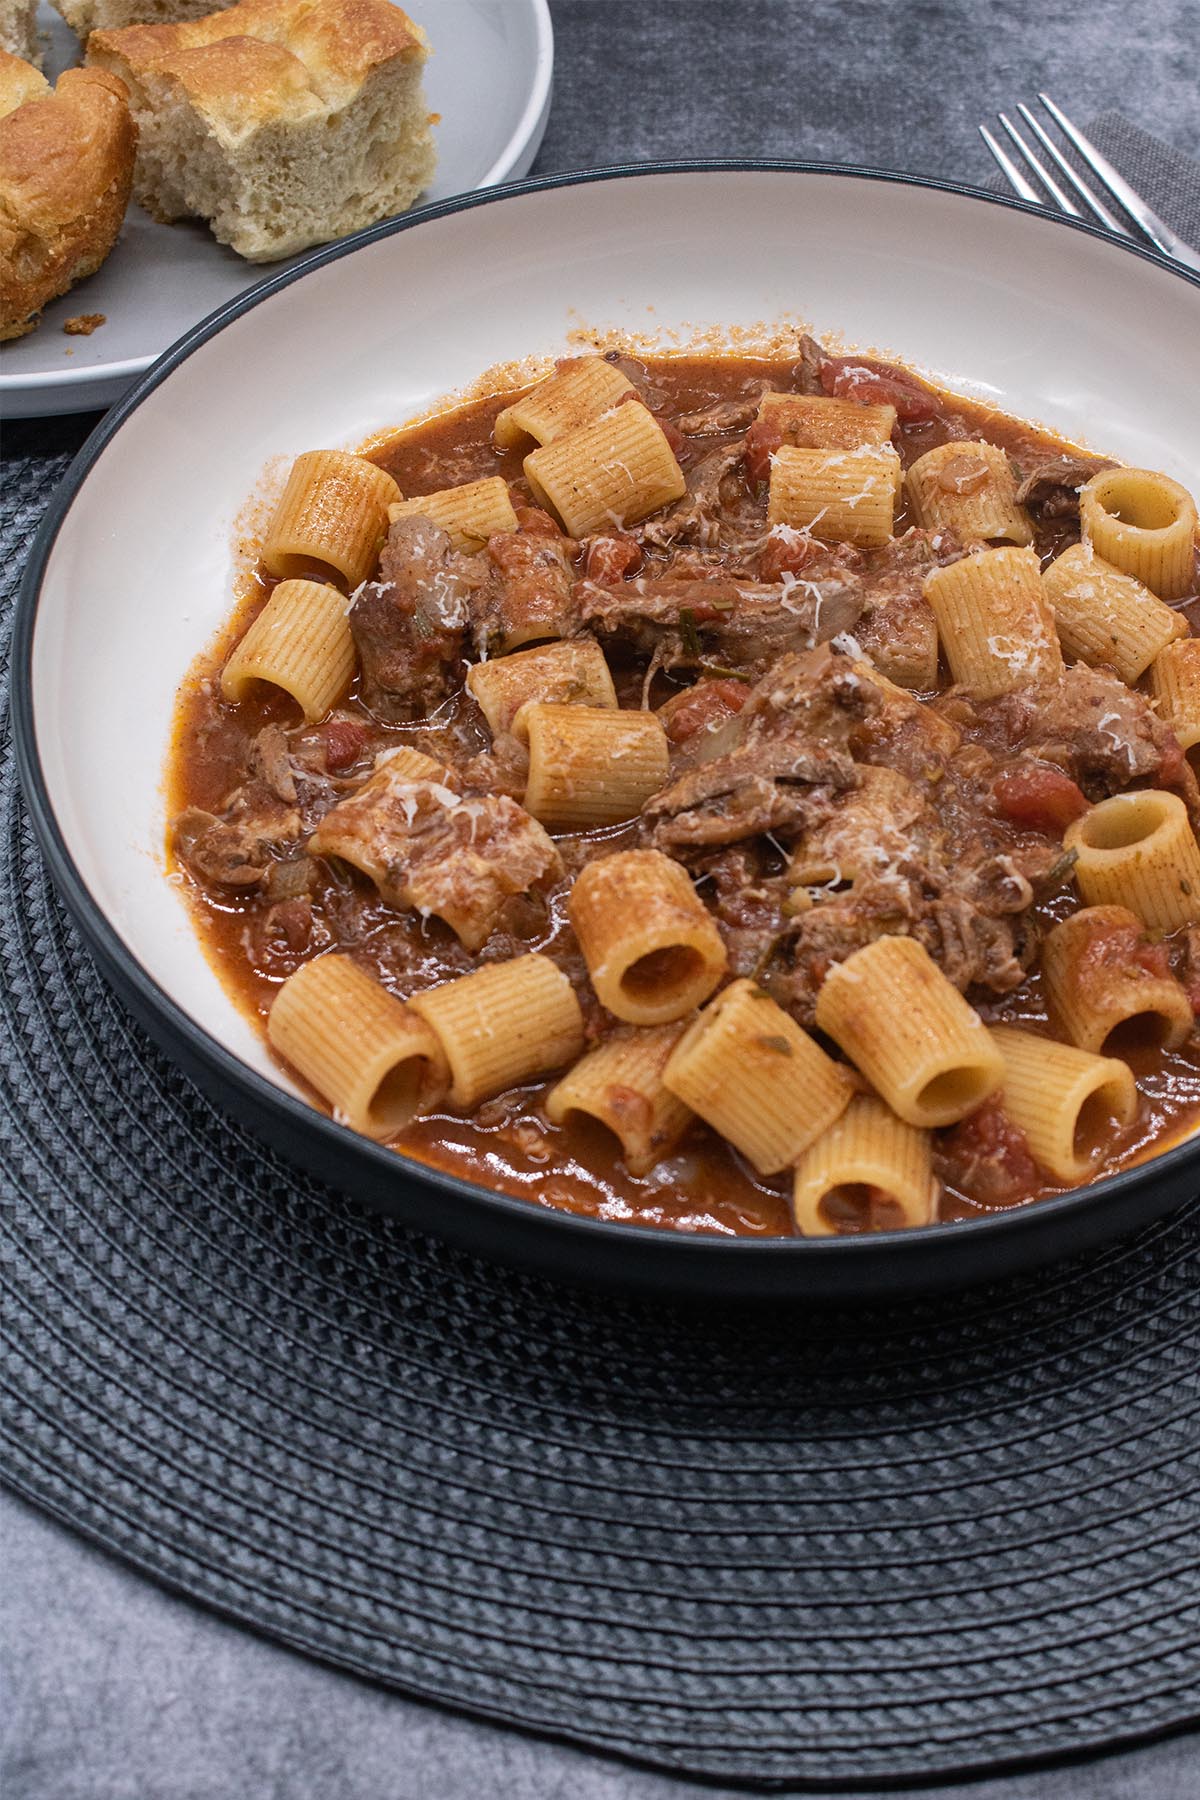 Venetian duck ragu in bowl with pasta, bread roll and fork in background